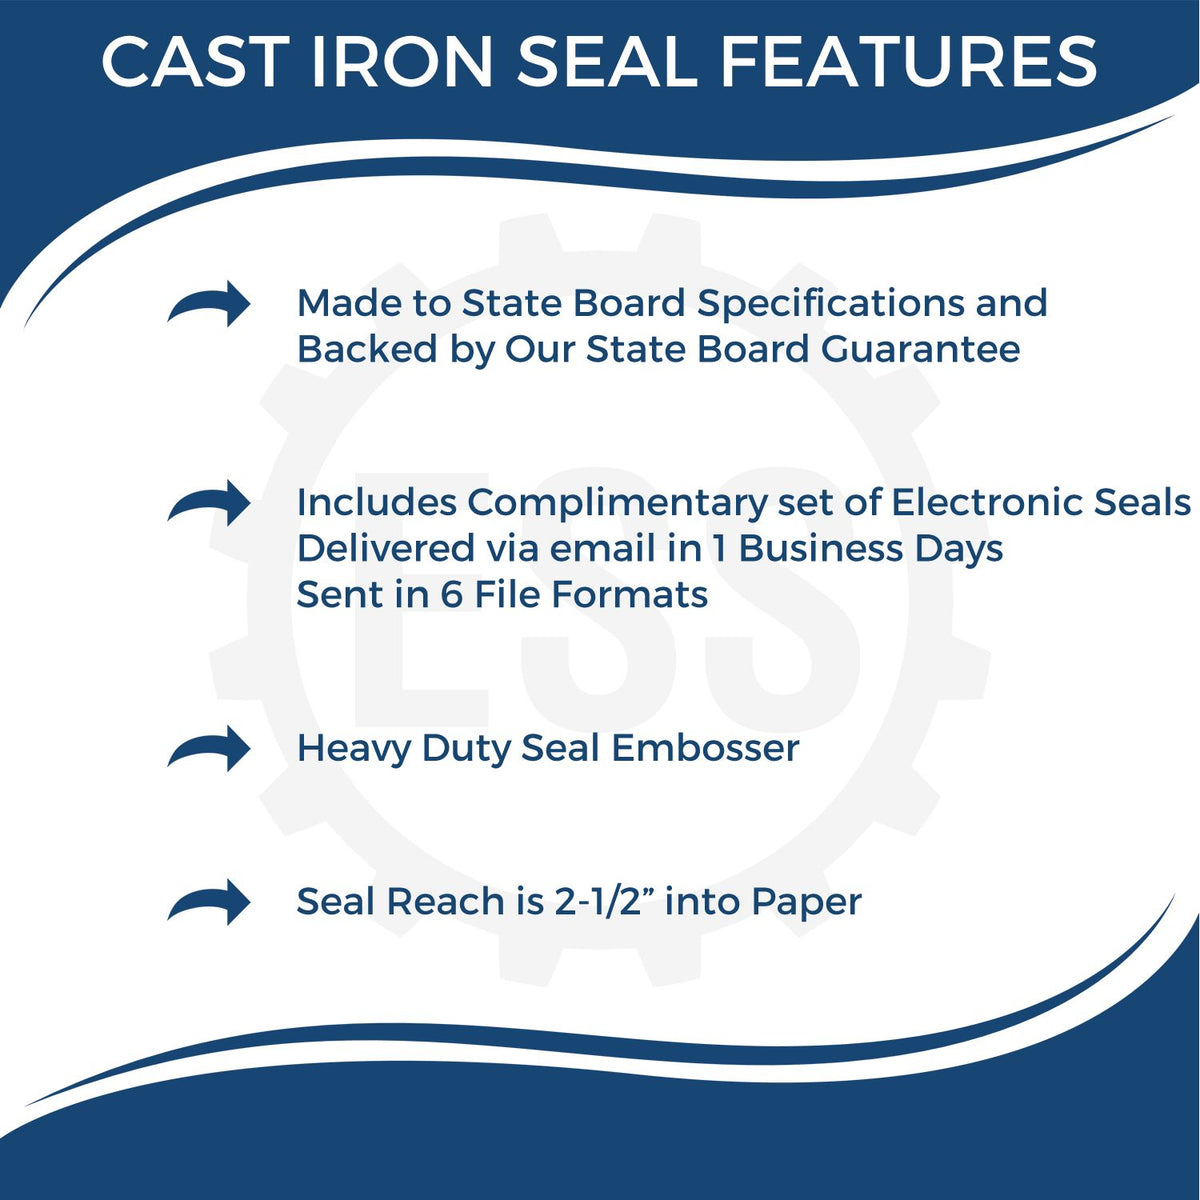 A picture of an infographic highlighting the selling points for the Heavy Duty Cast Iron Nevada Geologist Seal Embosser